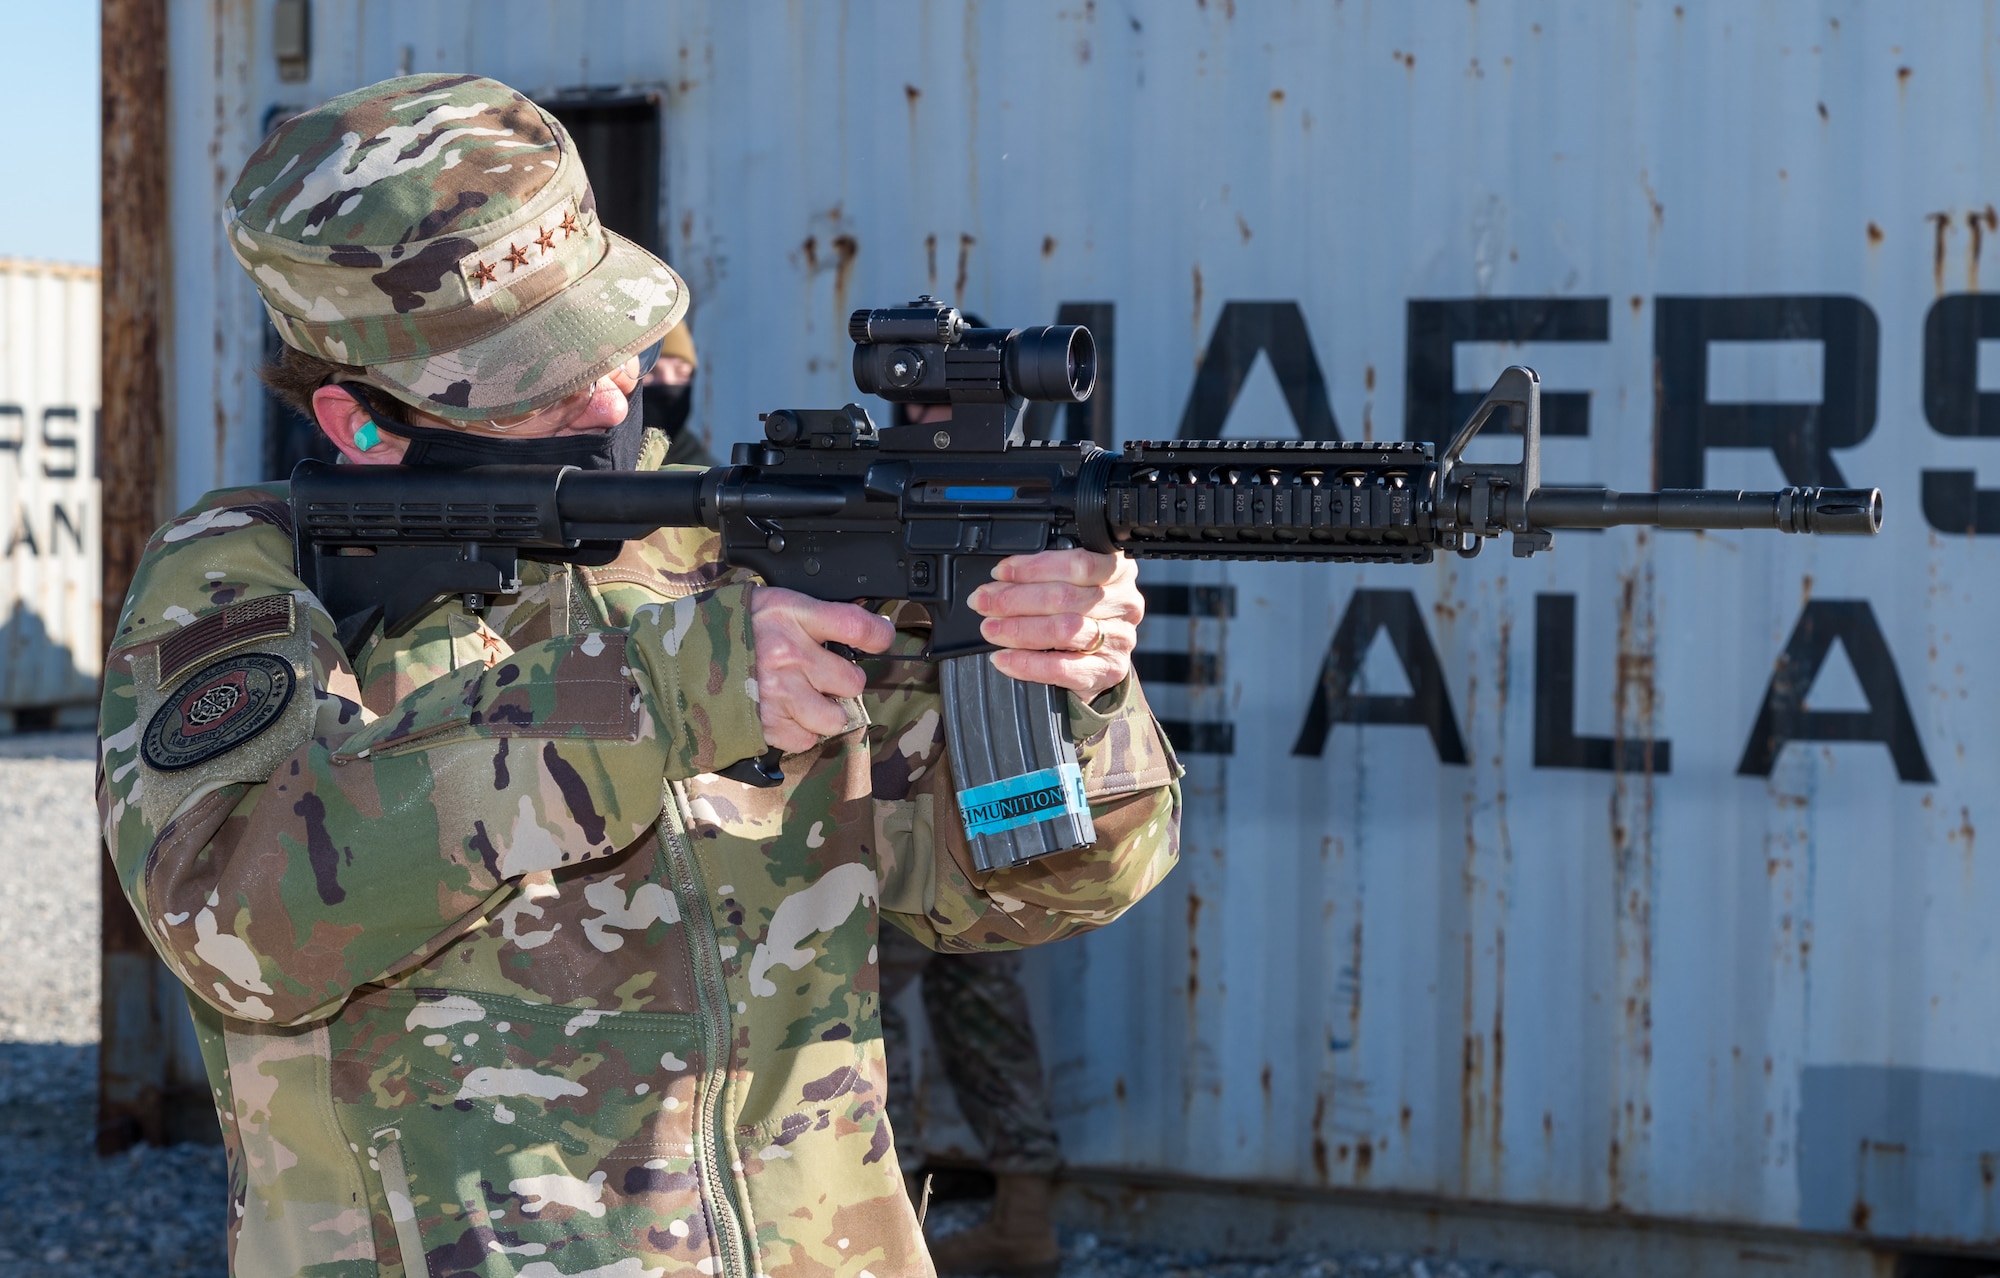 Gen. Jacqueline Van Ovost, Air Mobility Command commander, fires an M4 carbine during her visit to the Tactics and Leadership Nexus facility, Dec. 8, 2020, at Dover Air Force Base, Delaware. During her visit, Van Ovost witnessed firsthand how Dover AFB supports AMC’s priorities of enhancing full-spectrum readiness and developing innovative, multi-capable Airmen. (U.S. Air Force photo by Roland Balik)